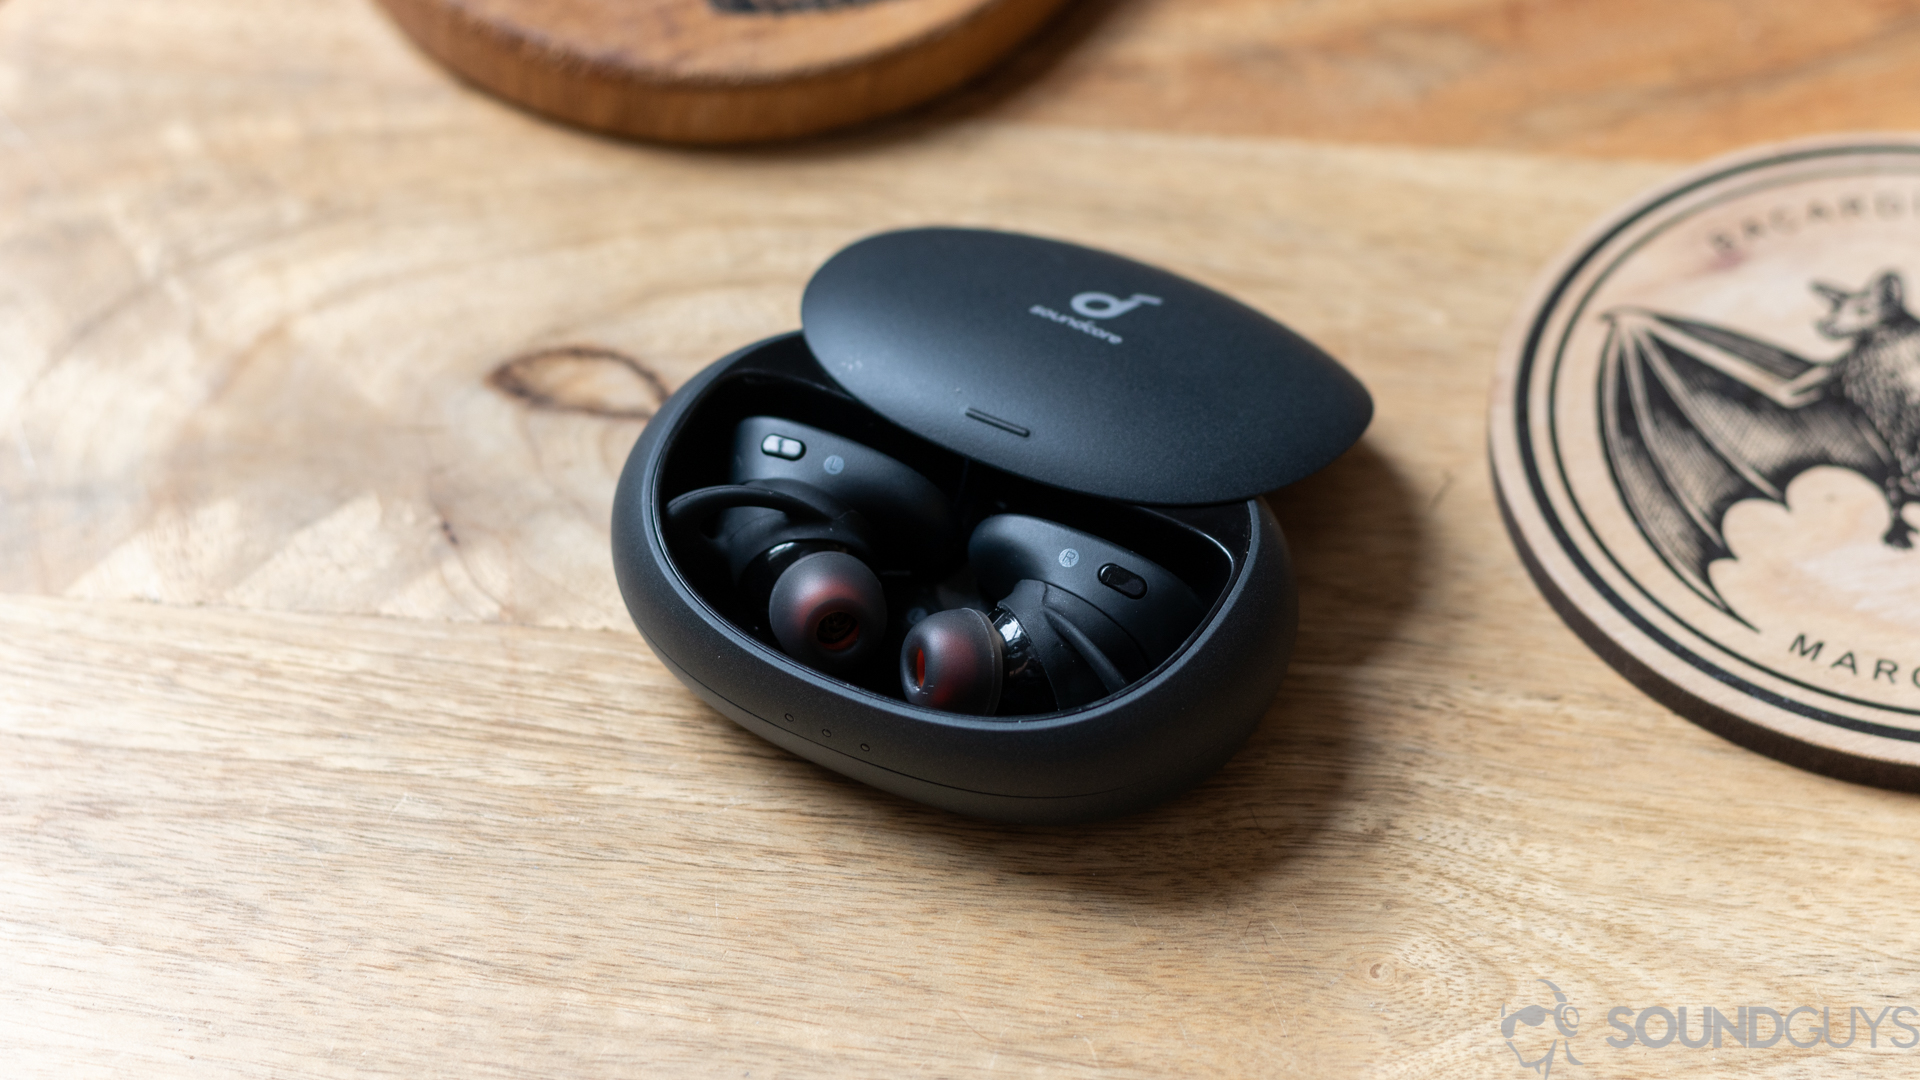 Anker Soundcore Liberty 2 Pro earbuds in the charging case with the lid open while resting on a wooden suface